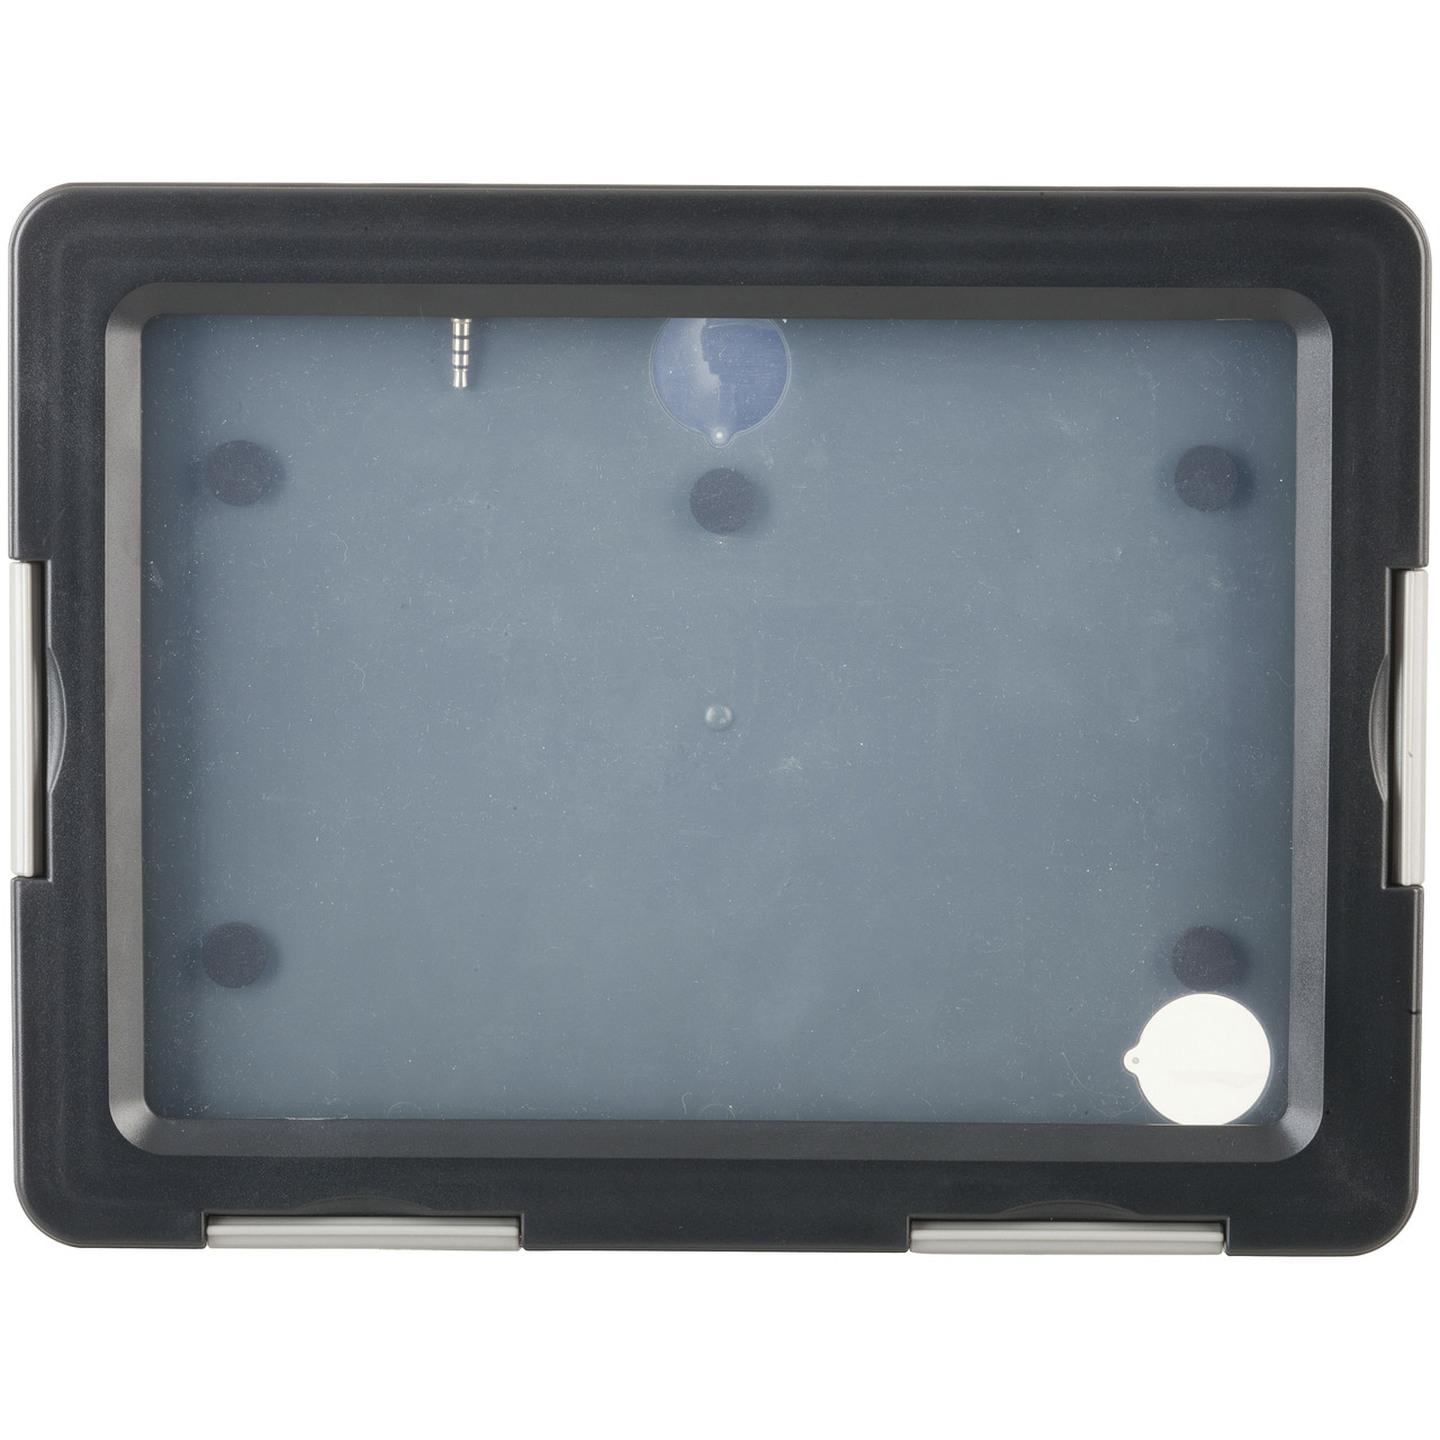 Waterproof 10.1 Hard Tablet Case with Suction Mount